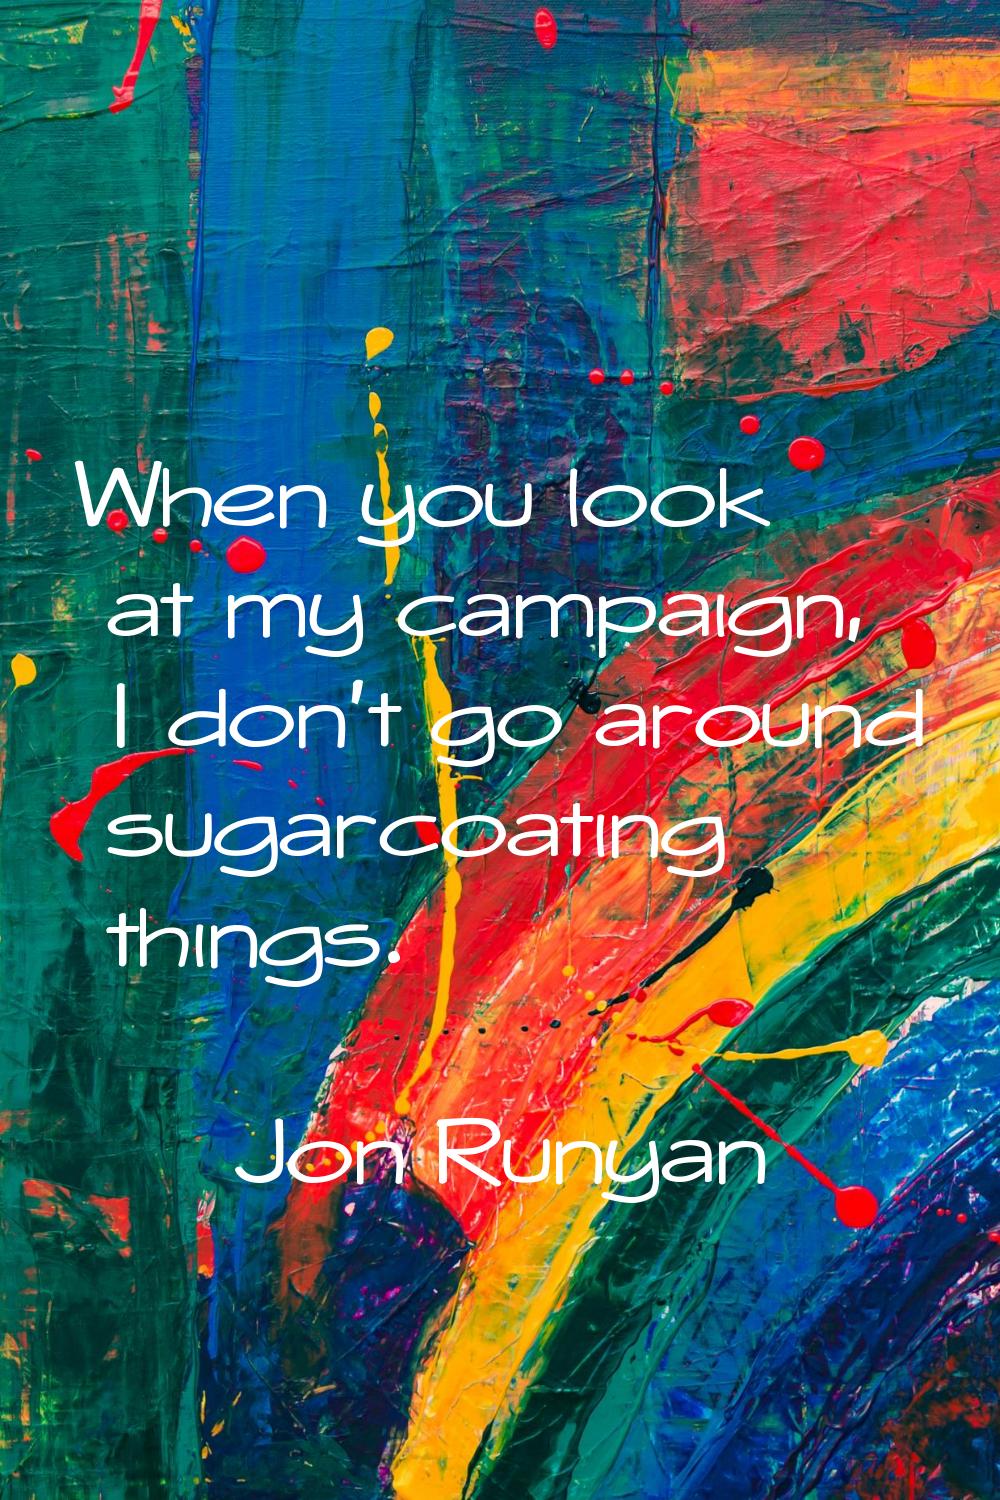 When you look at my campaign, I don't go around sugarcoating things.